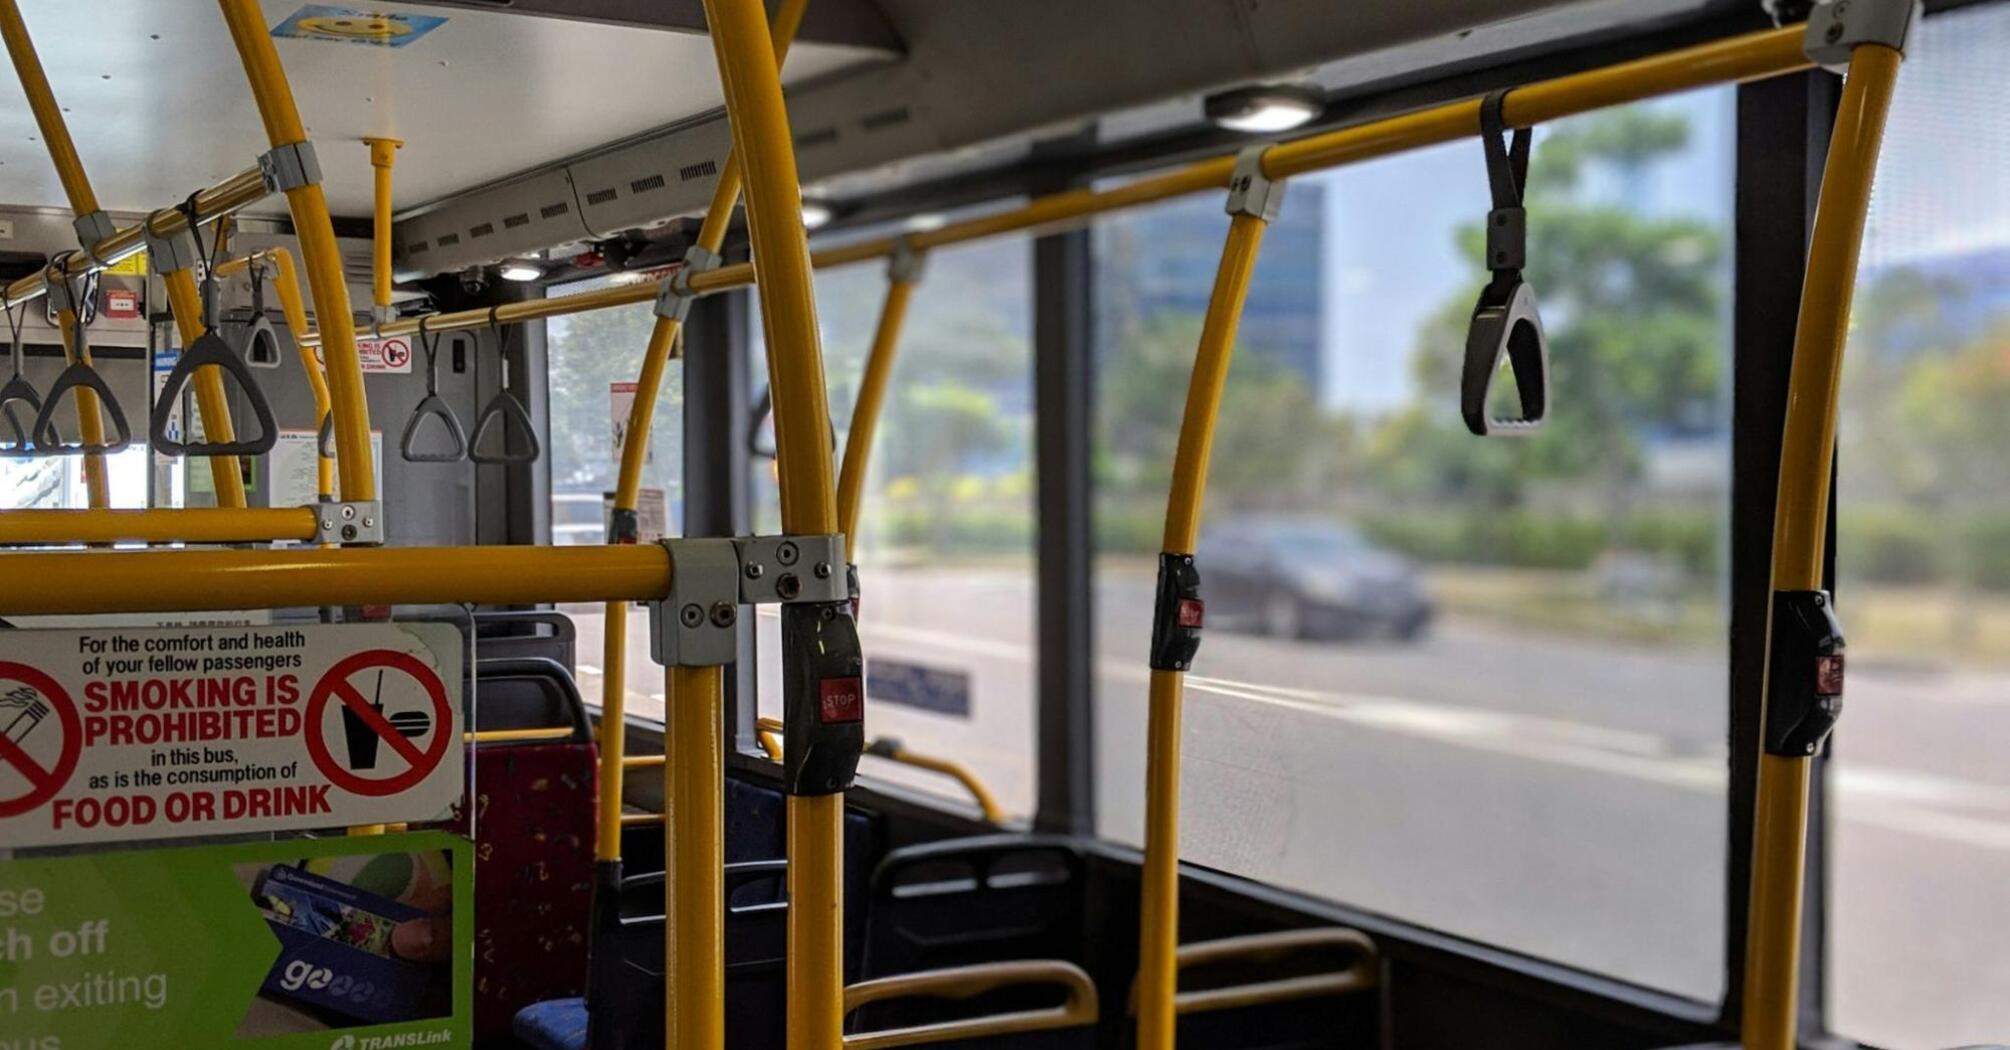 Interior of a Translink bus with yellow handrails and no smoking sign